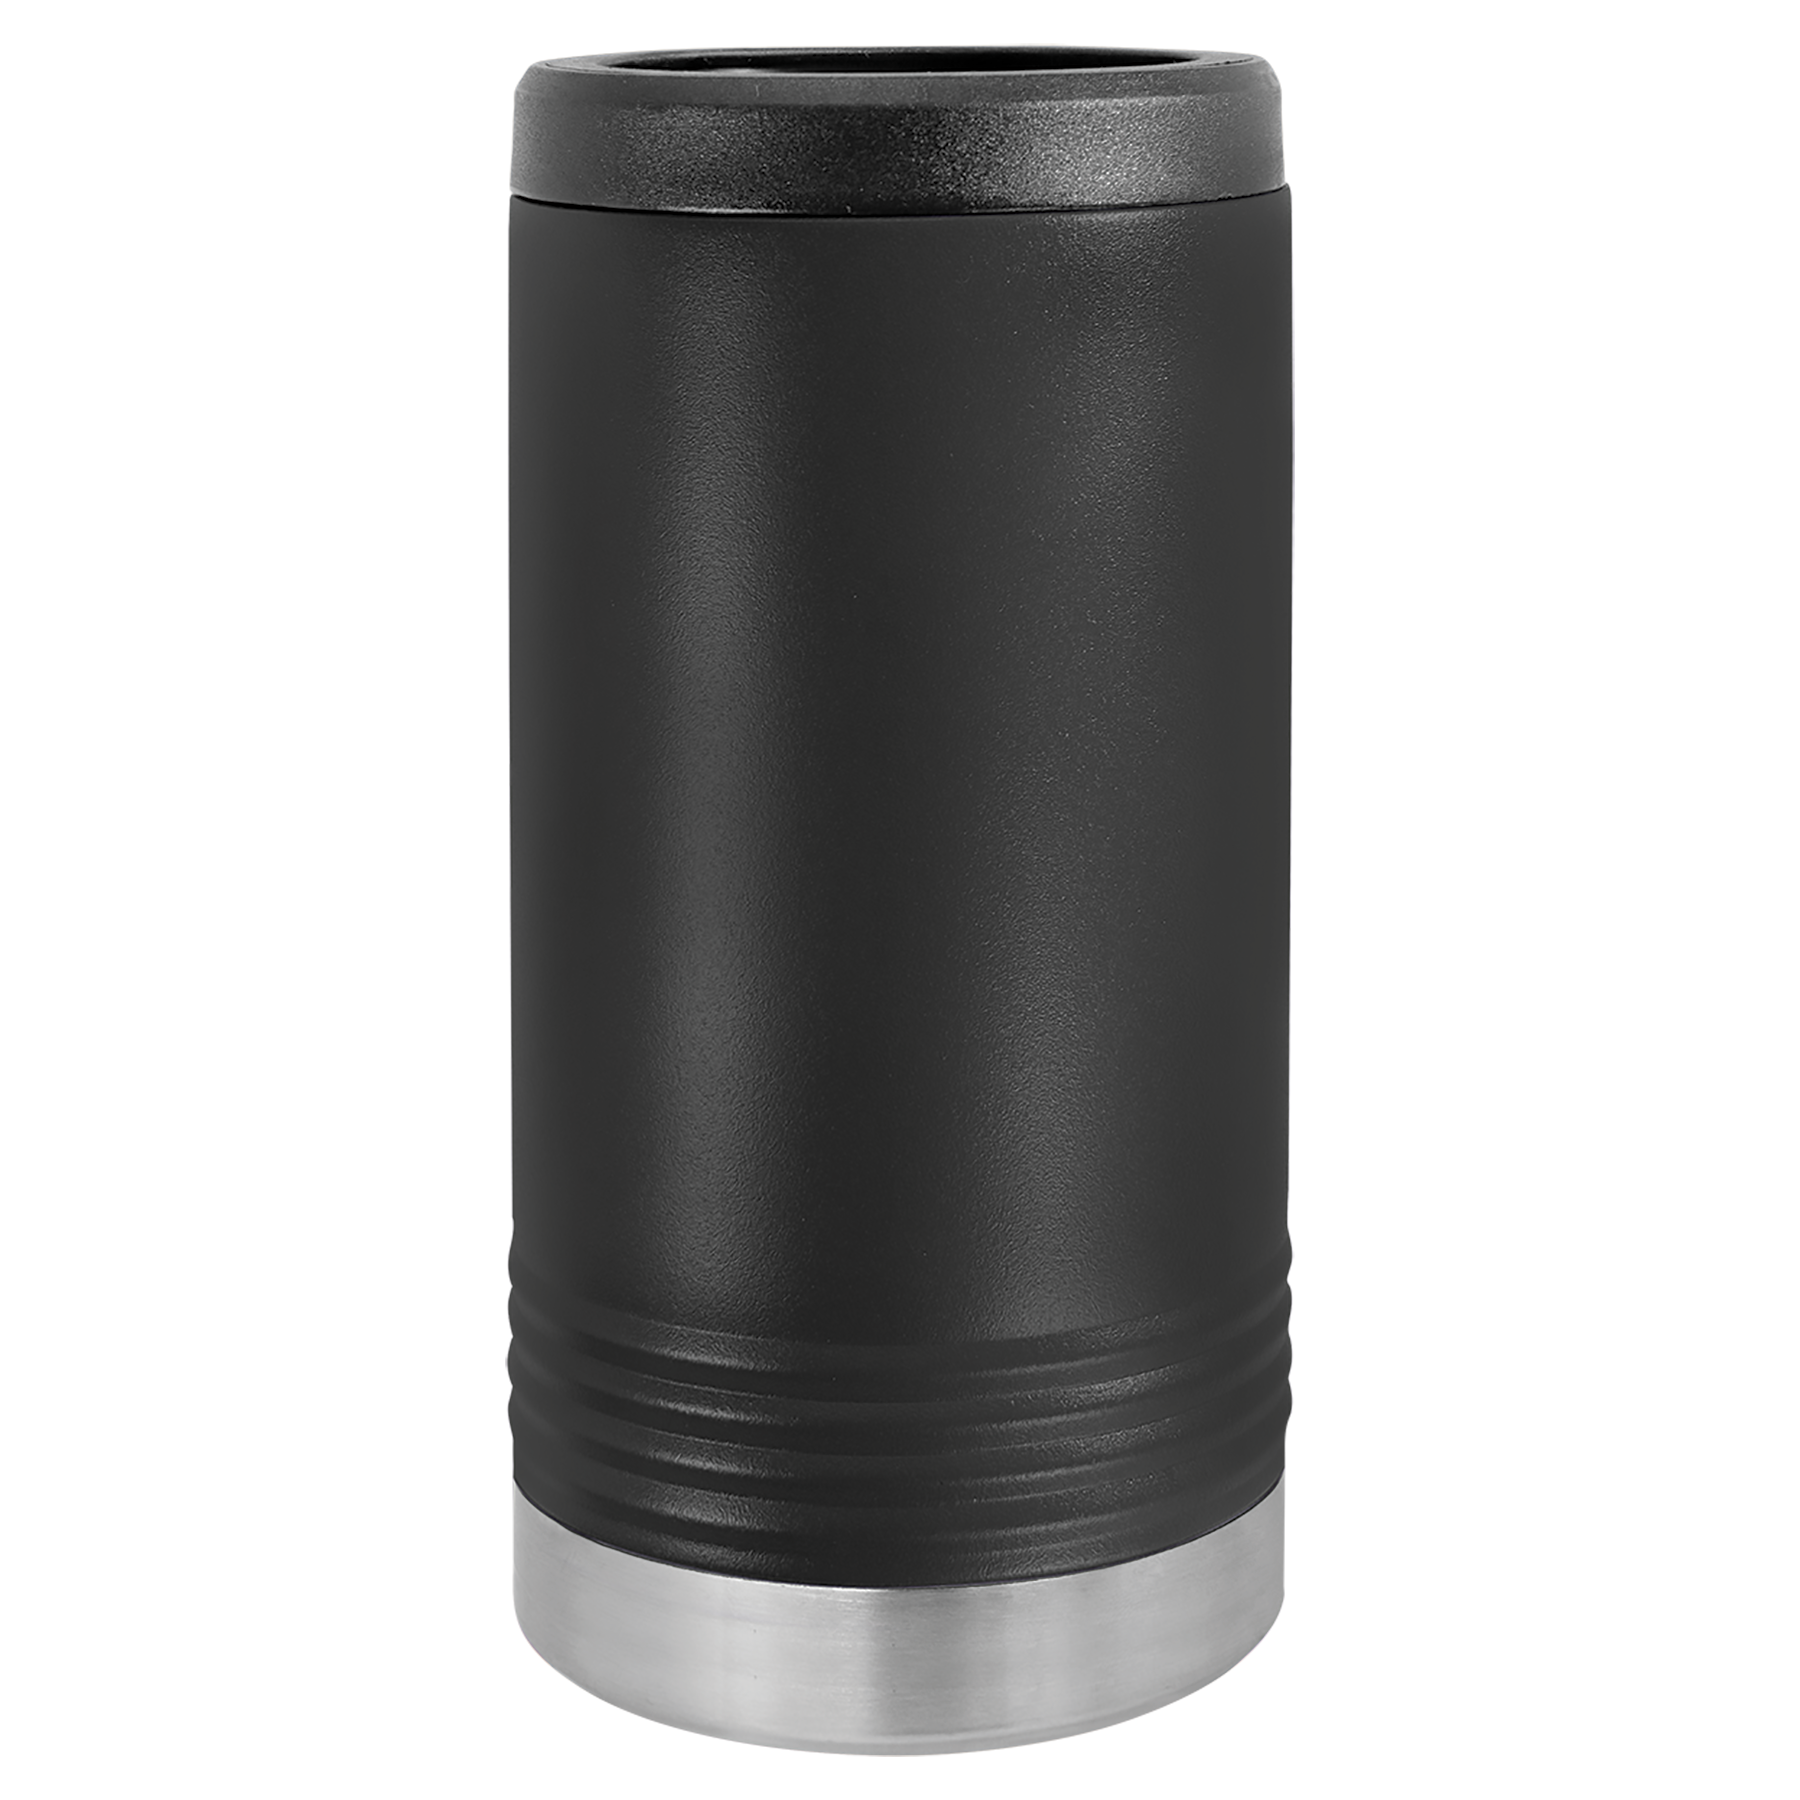 Black Slim Beverage Holder -One Free Engraving   -Double-wall Vacuum Insulated  -Made from 18/8 Gauge Stainless Steel (Type 304 Food Grade)  -Fits most Tall Slim Cans  -Not recommended for Dishwasher  -Works with Cold and Hot Drinks  -17 Color Options  -Perfect for Personalized Gifts, Awards, Incentives, Swag & Fundraisers